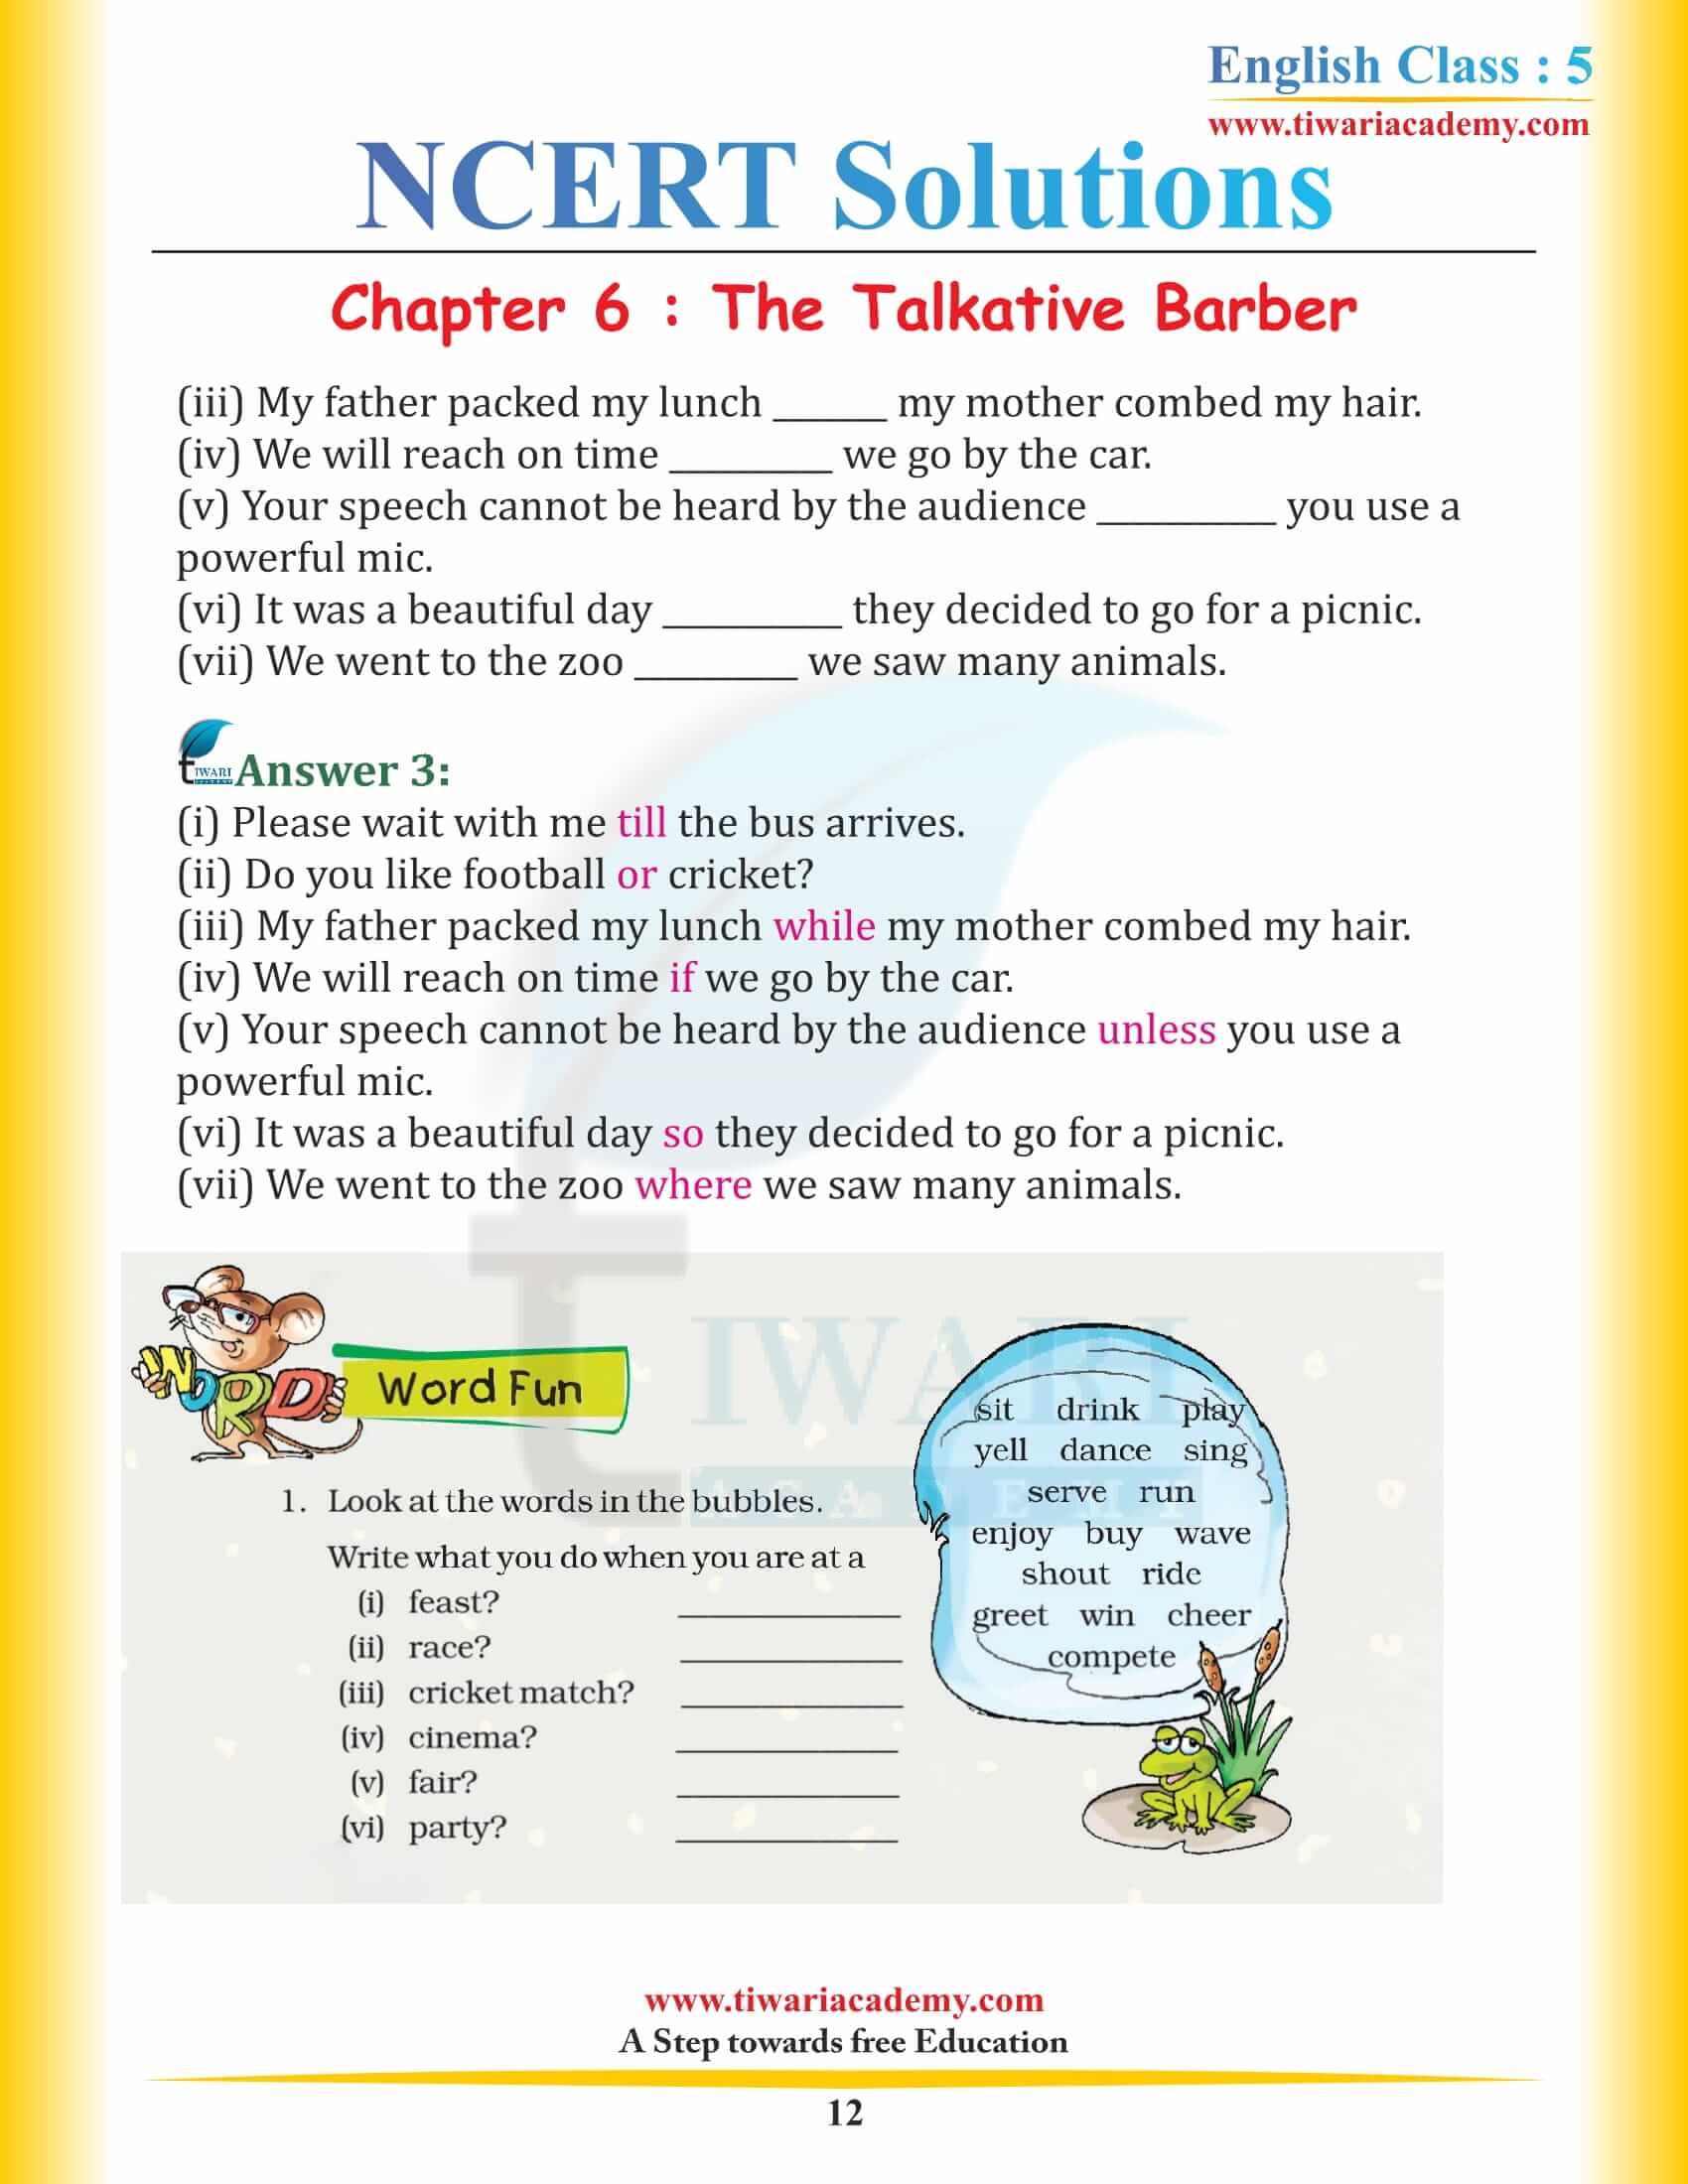 NCERT Solutions for Class 5 English Chapter 6 The Talkative Barber Hindi Medium